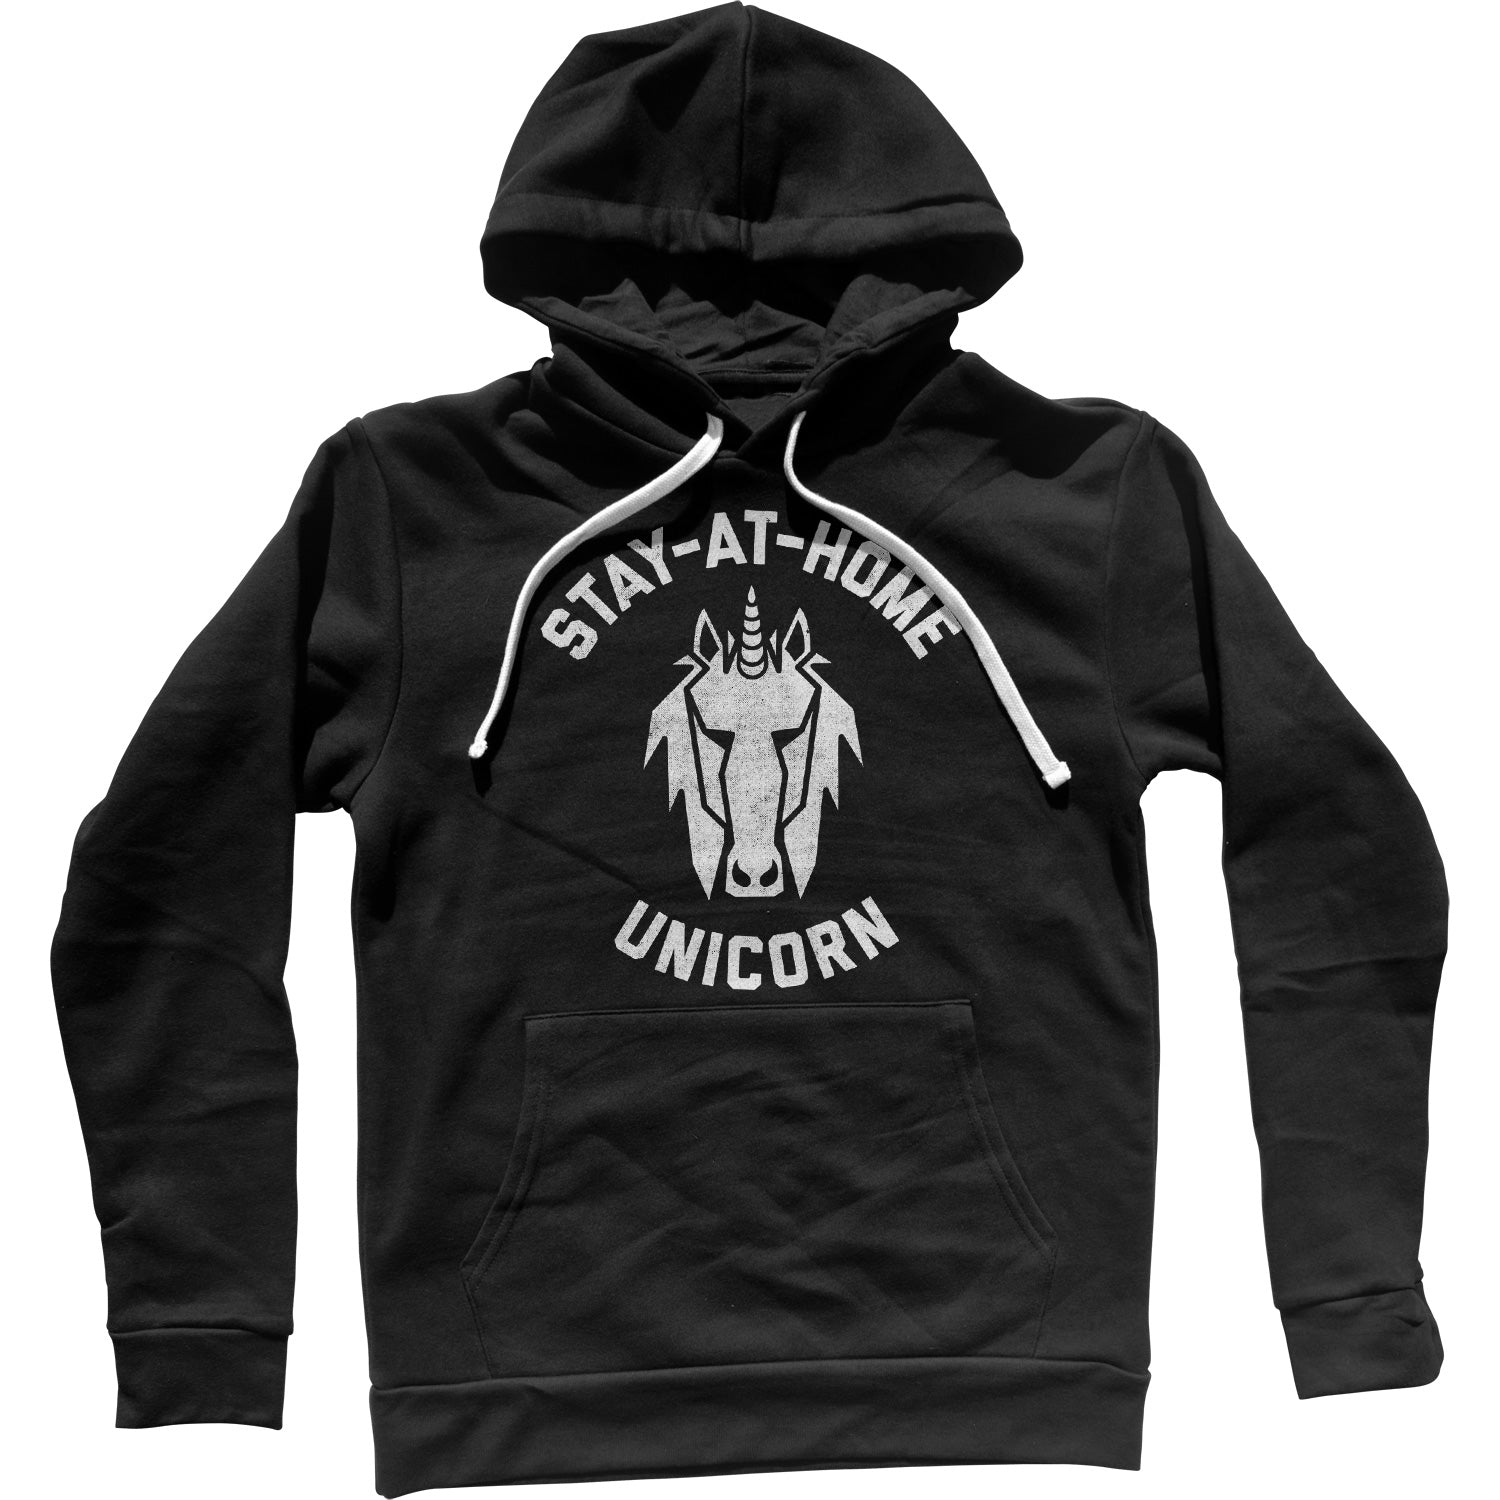 Stay at Home Unicorn Unisex Hoodie